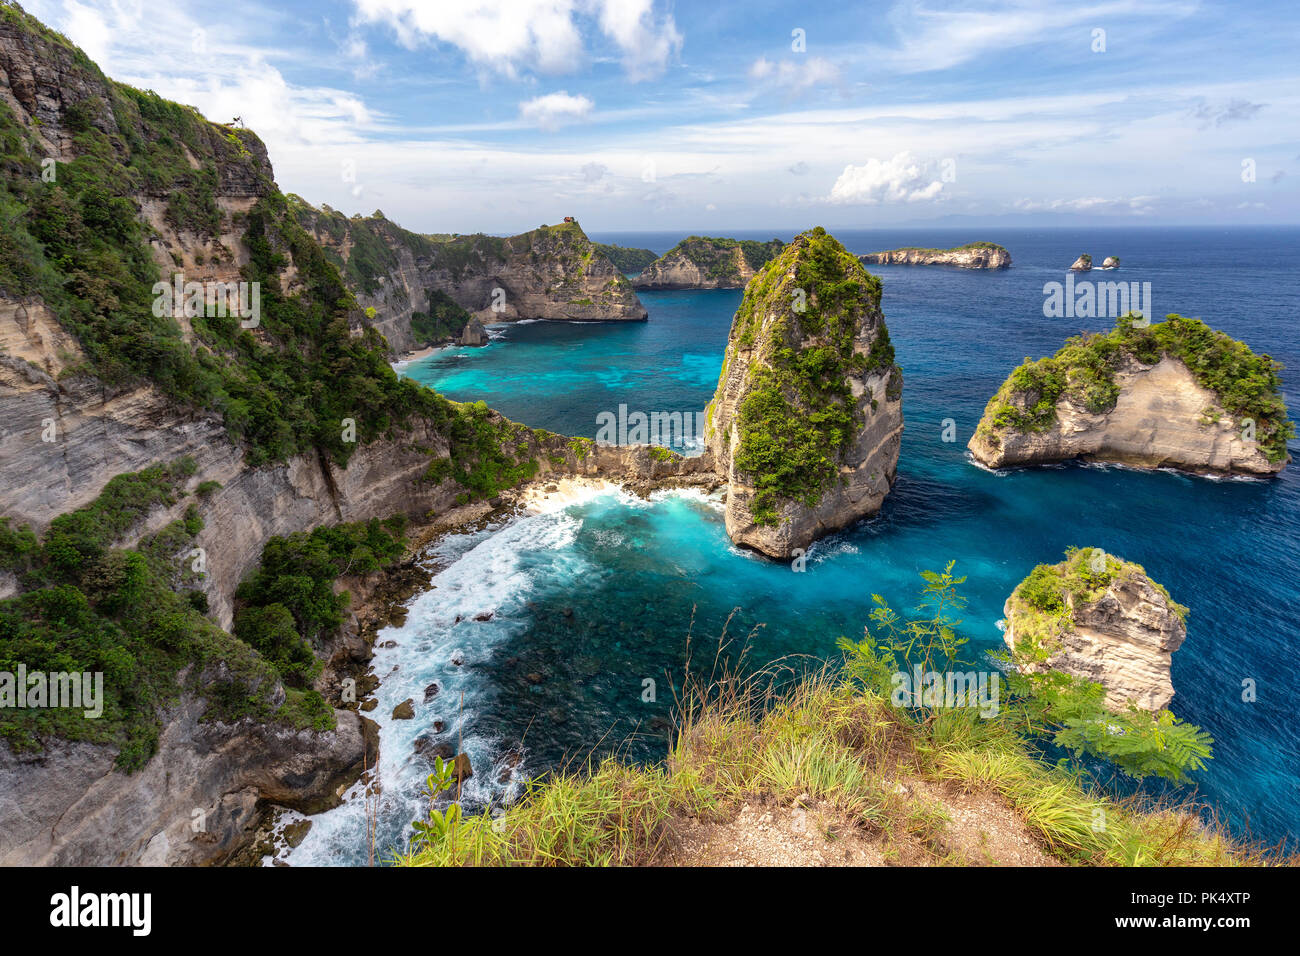 Interesting view of a collection of small islands near the Atuh Raja Lima shrine on Nusa Penida, Indonesia. Stock Photo